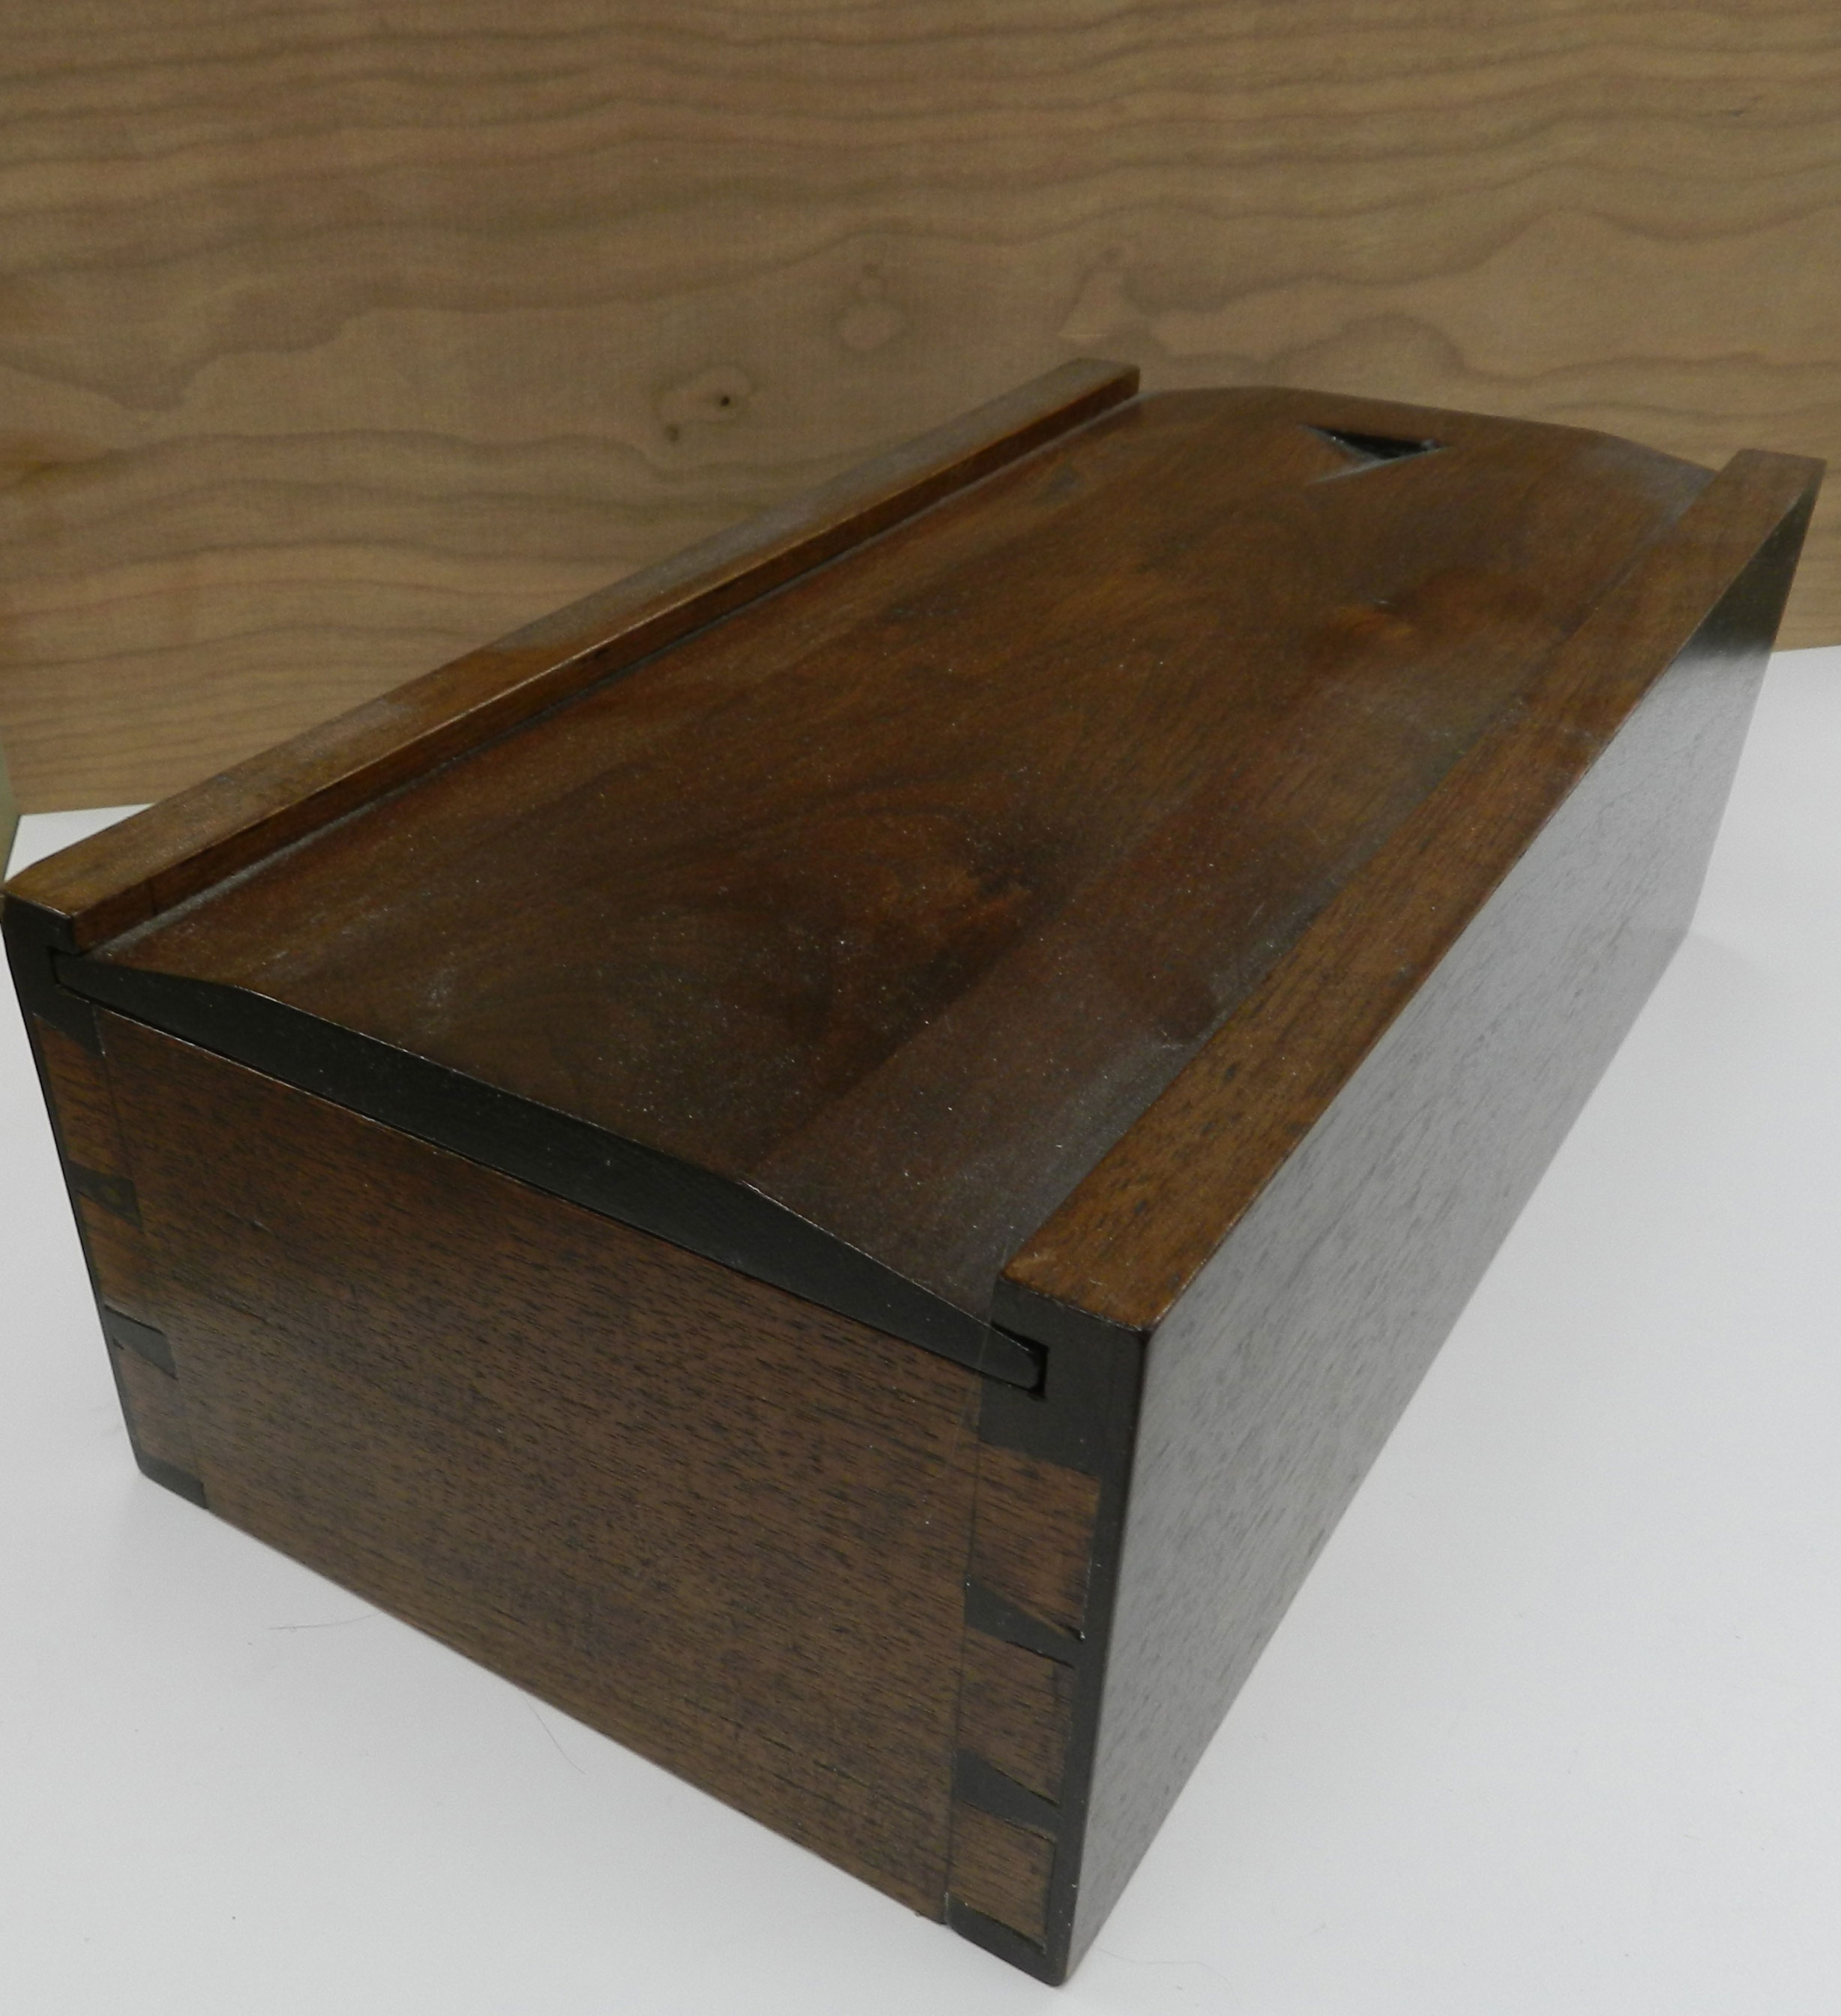 Traditional Dovetailed Candle Box